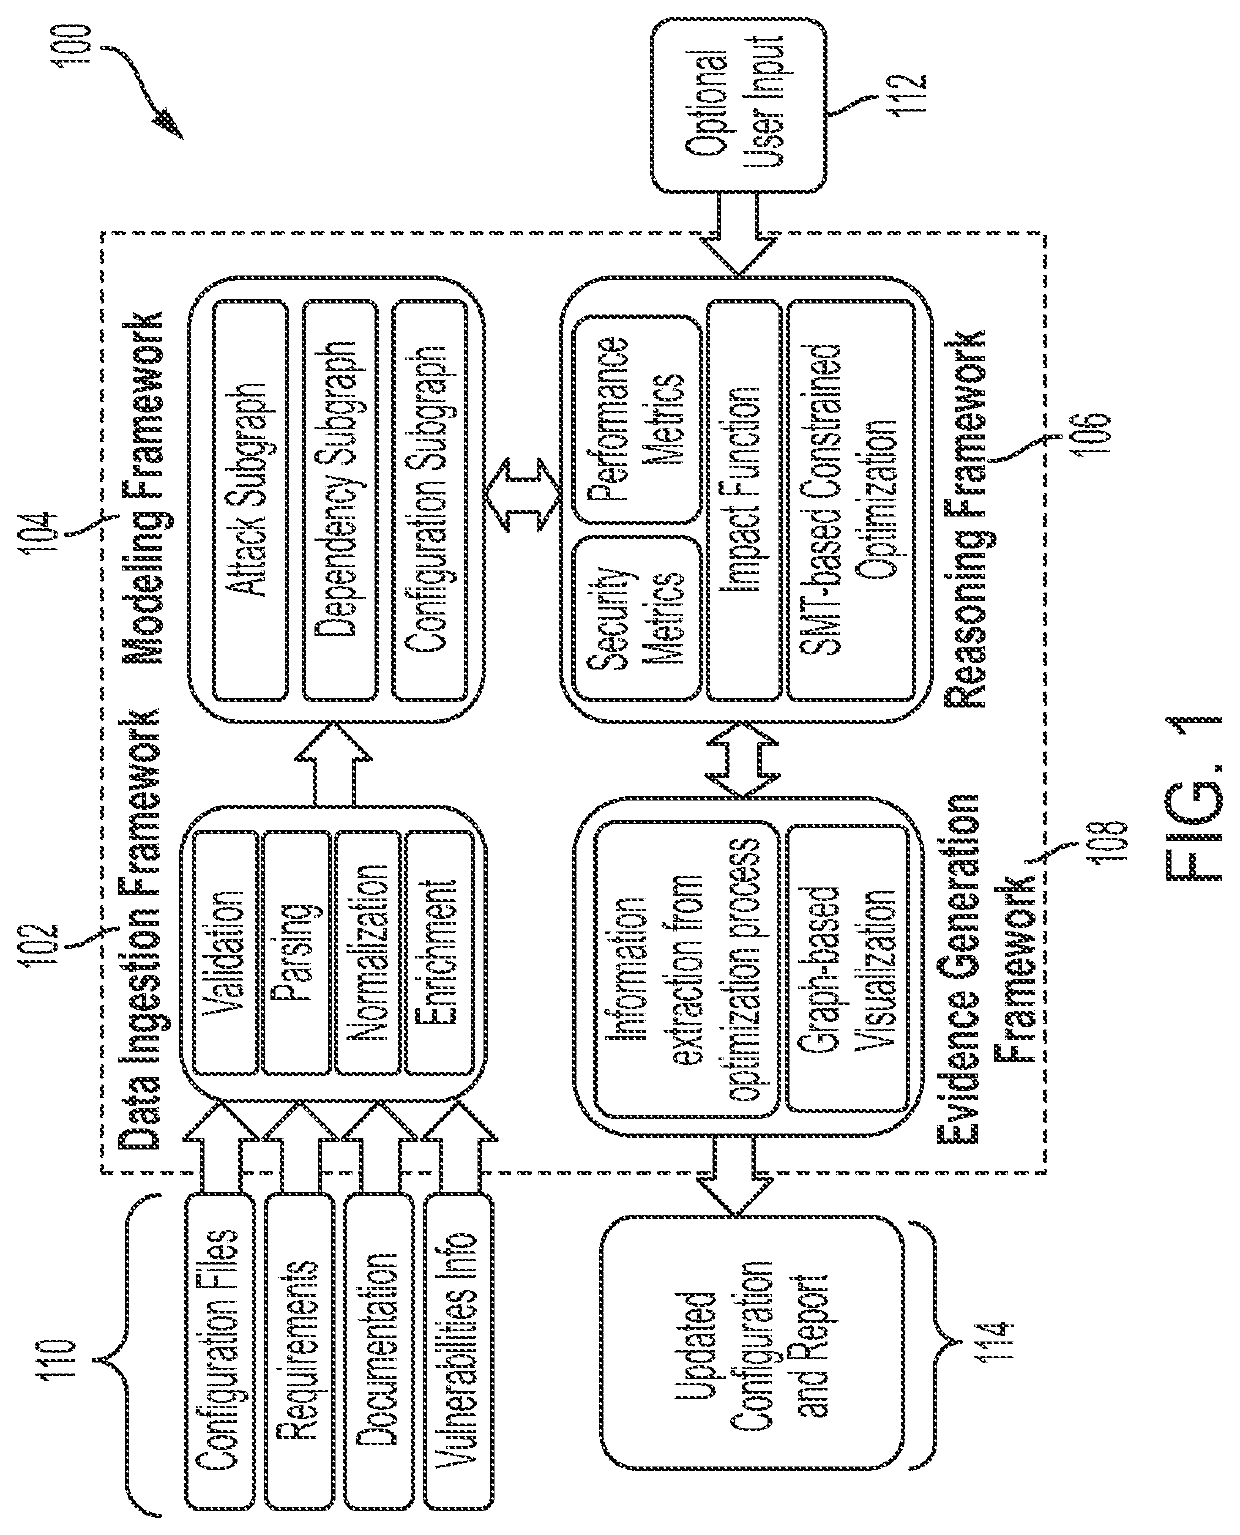 System and method for modeling a shared resource in a multi-layer reasoning graph based on configuration security